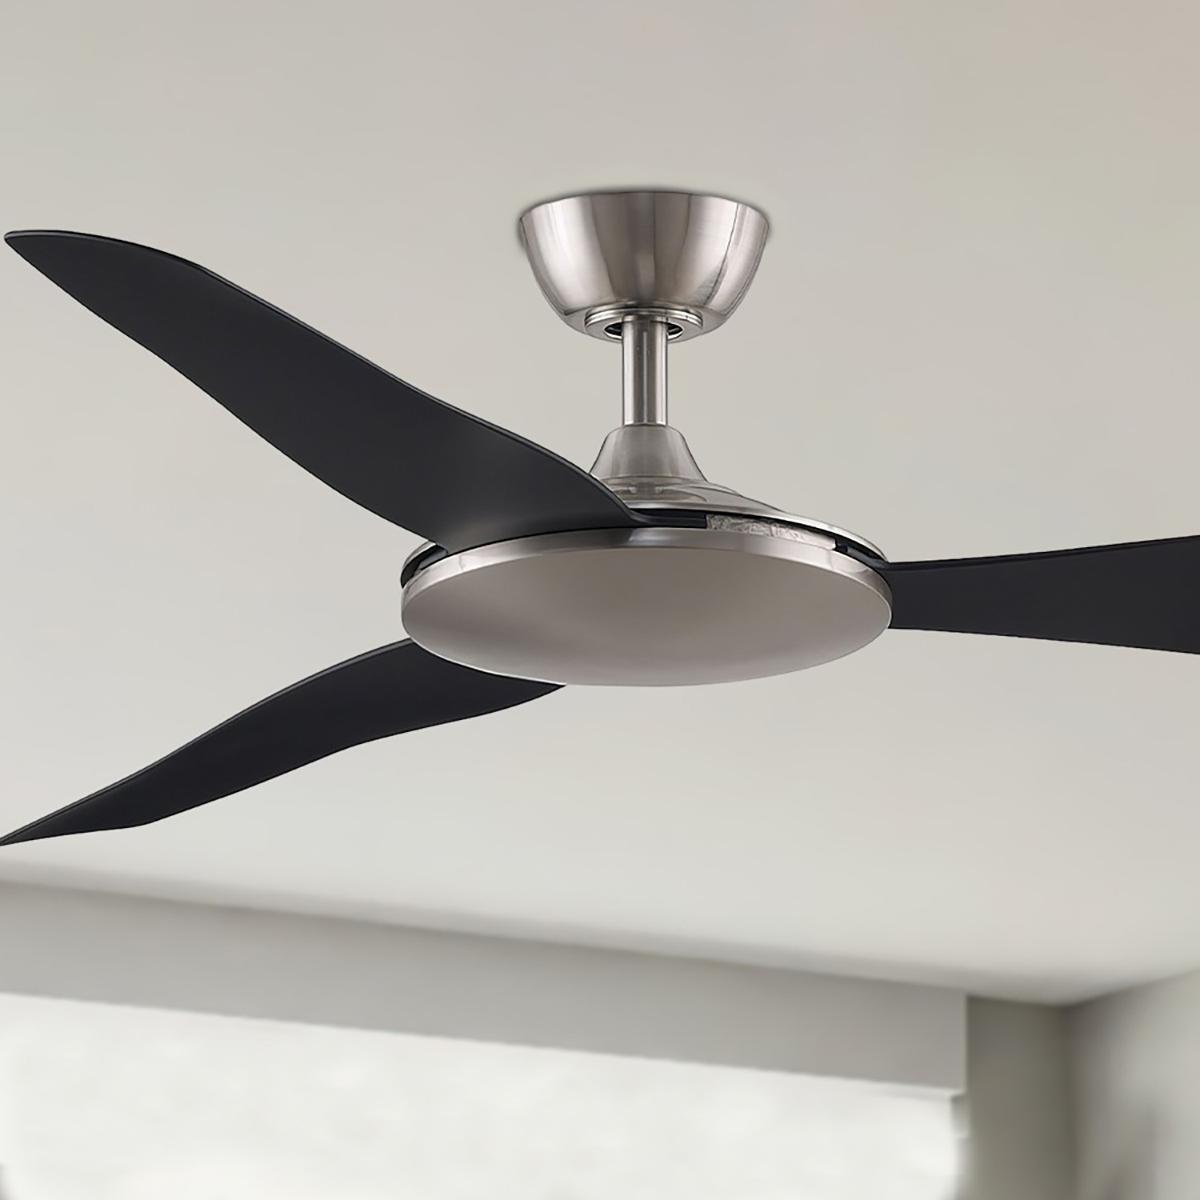 GlideAire 52 Inch DC Motor Indoor/Outdoor Ceiling Fan With Remote - Bees Lighting